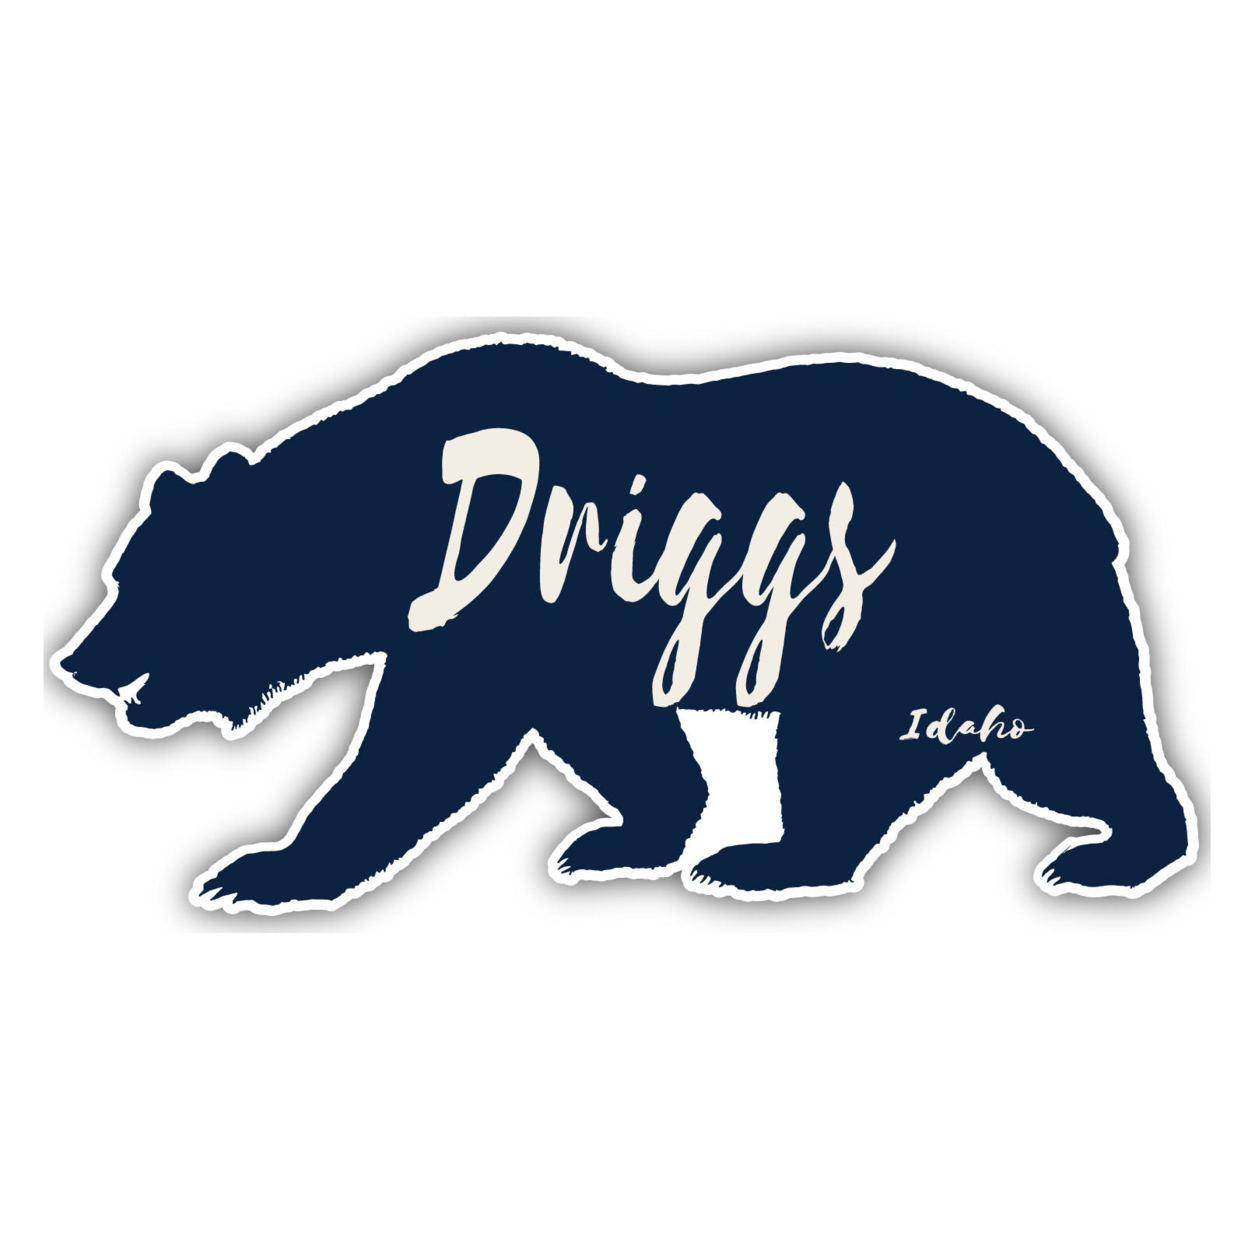 Driggs Idaho Souvenir Decorative Stickers (Choose Theme And Size) - 4-Pack, 8-Inch, Bear